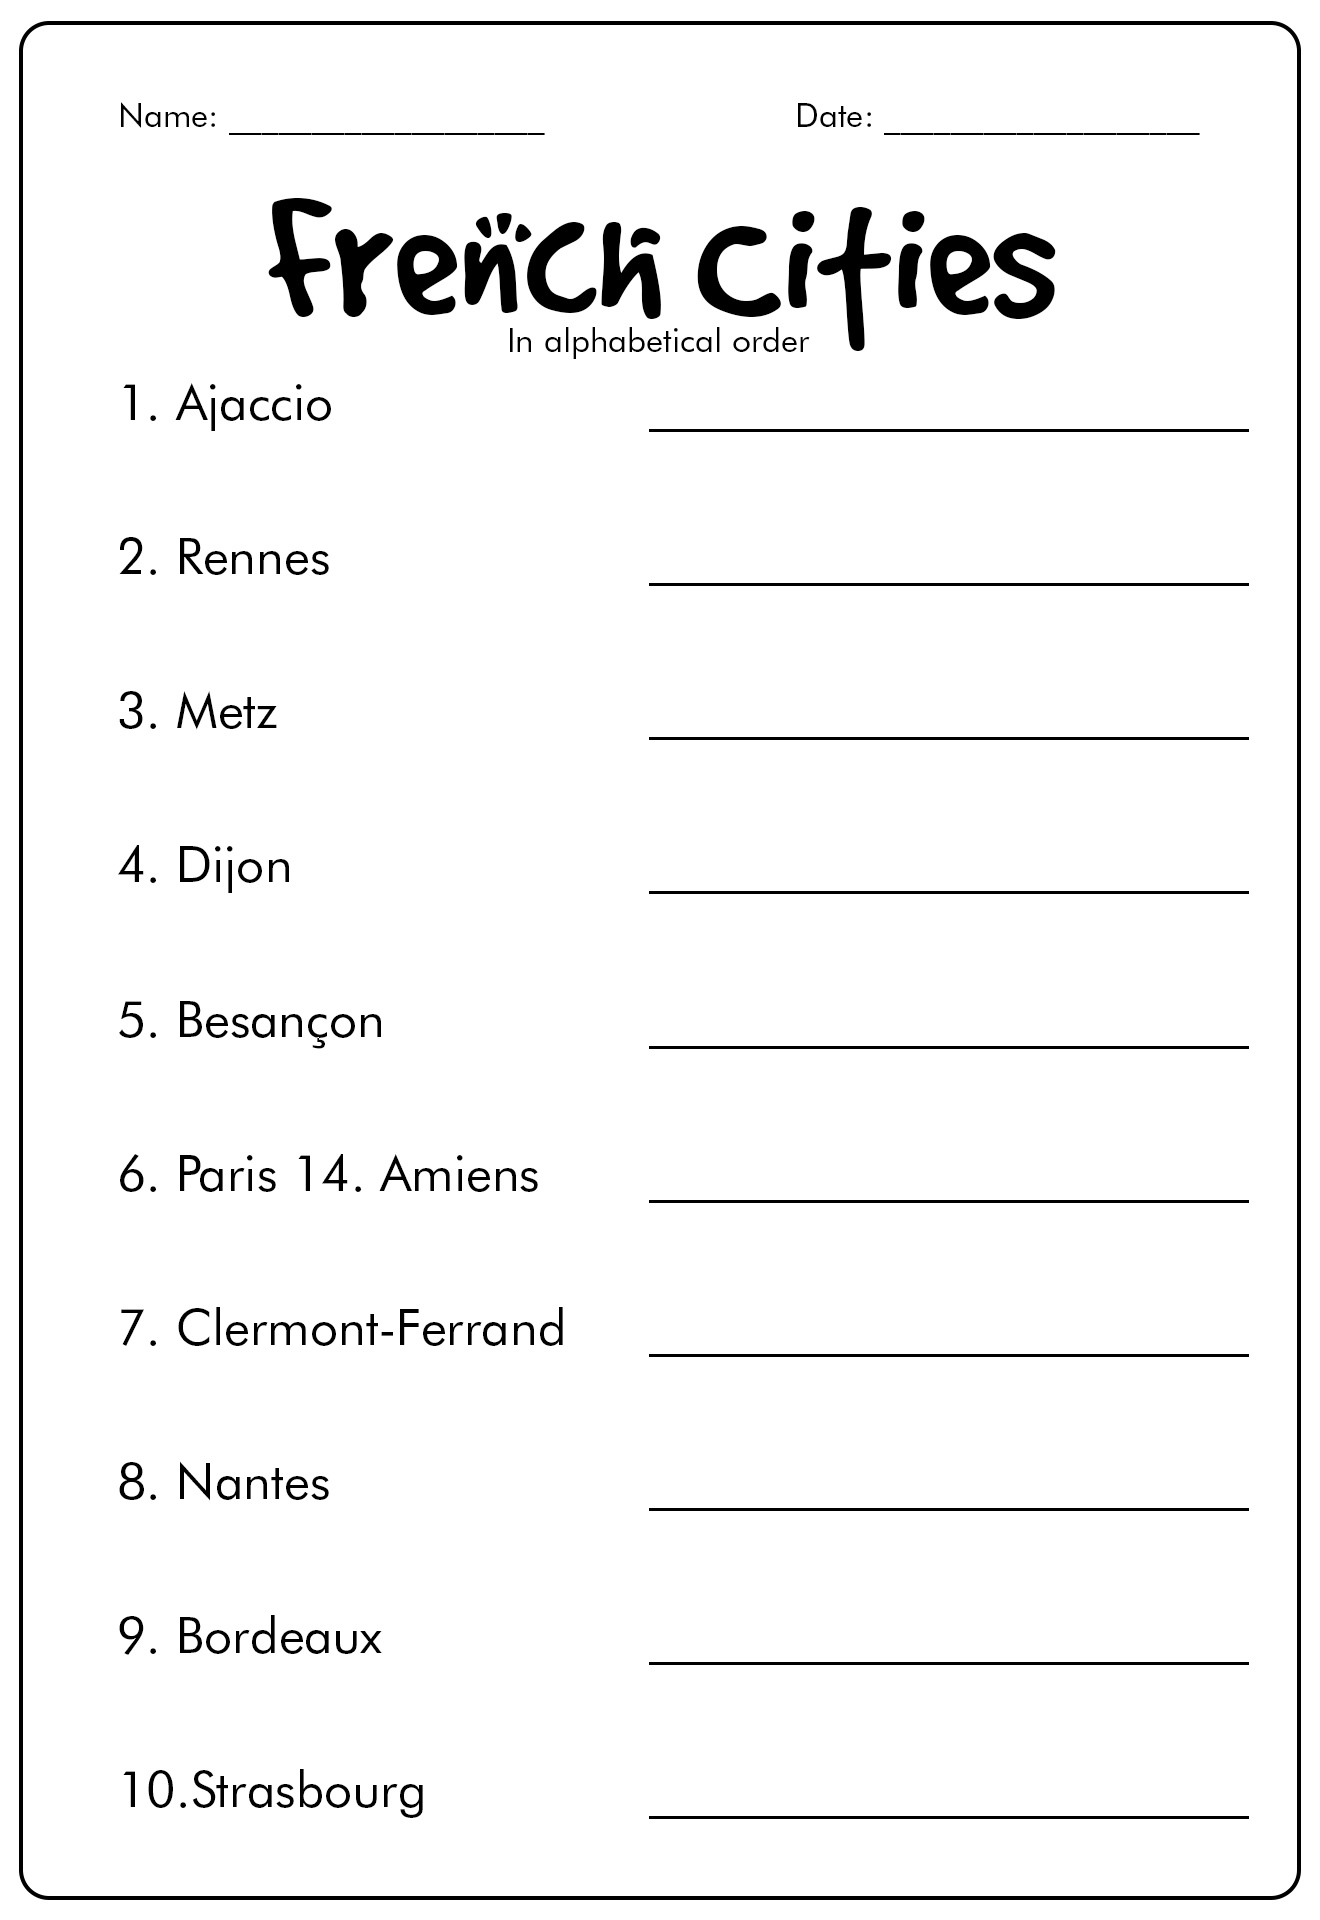 11-best-images-of-beginner-french-worksheets-free-printable-french-worksheets-beginners